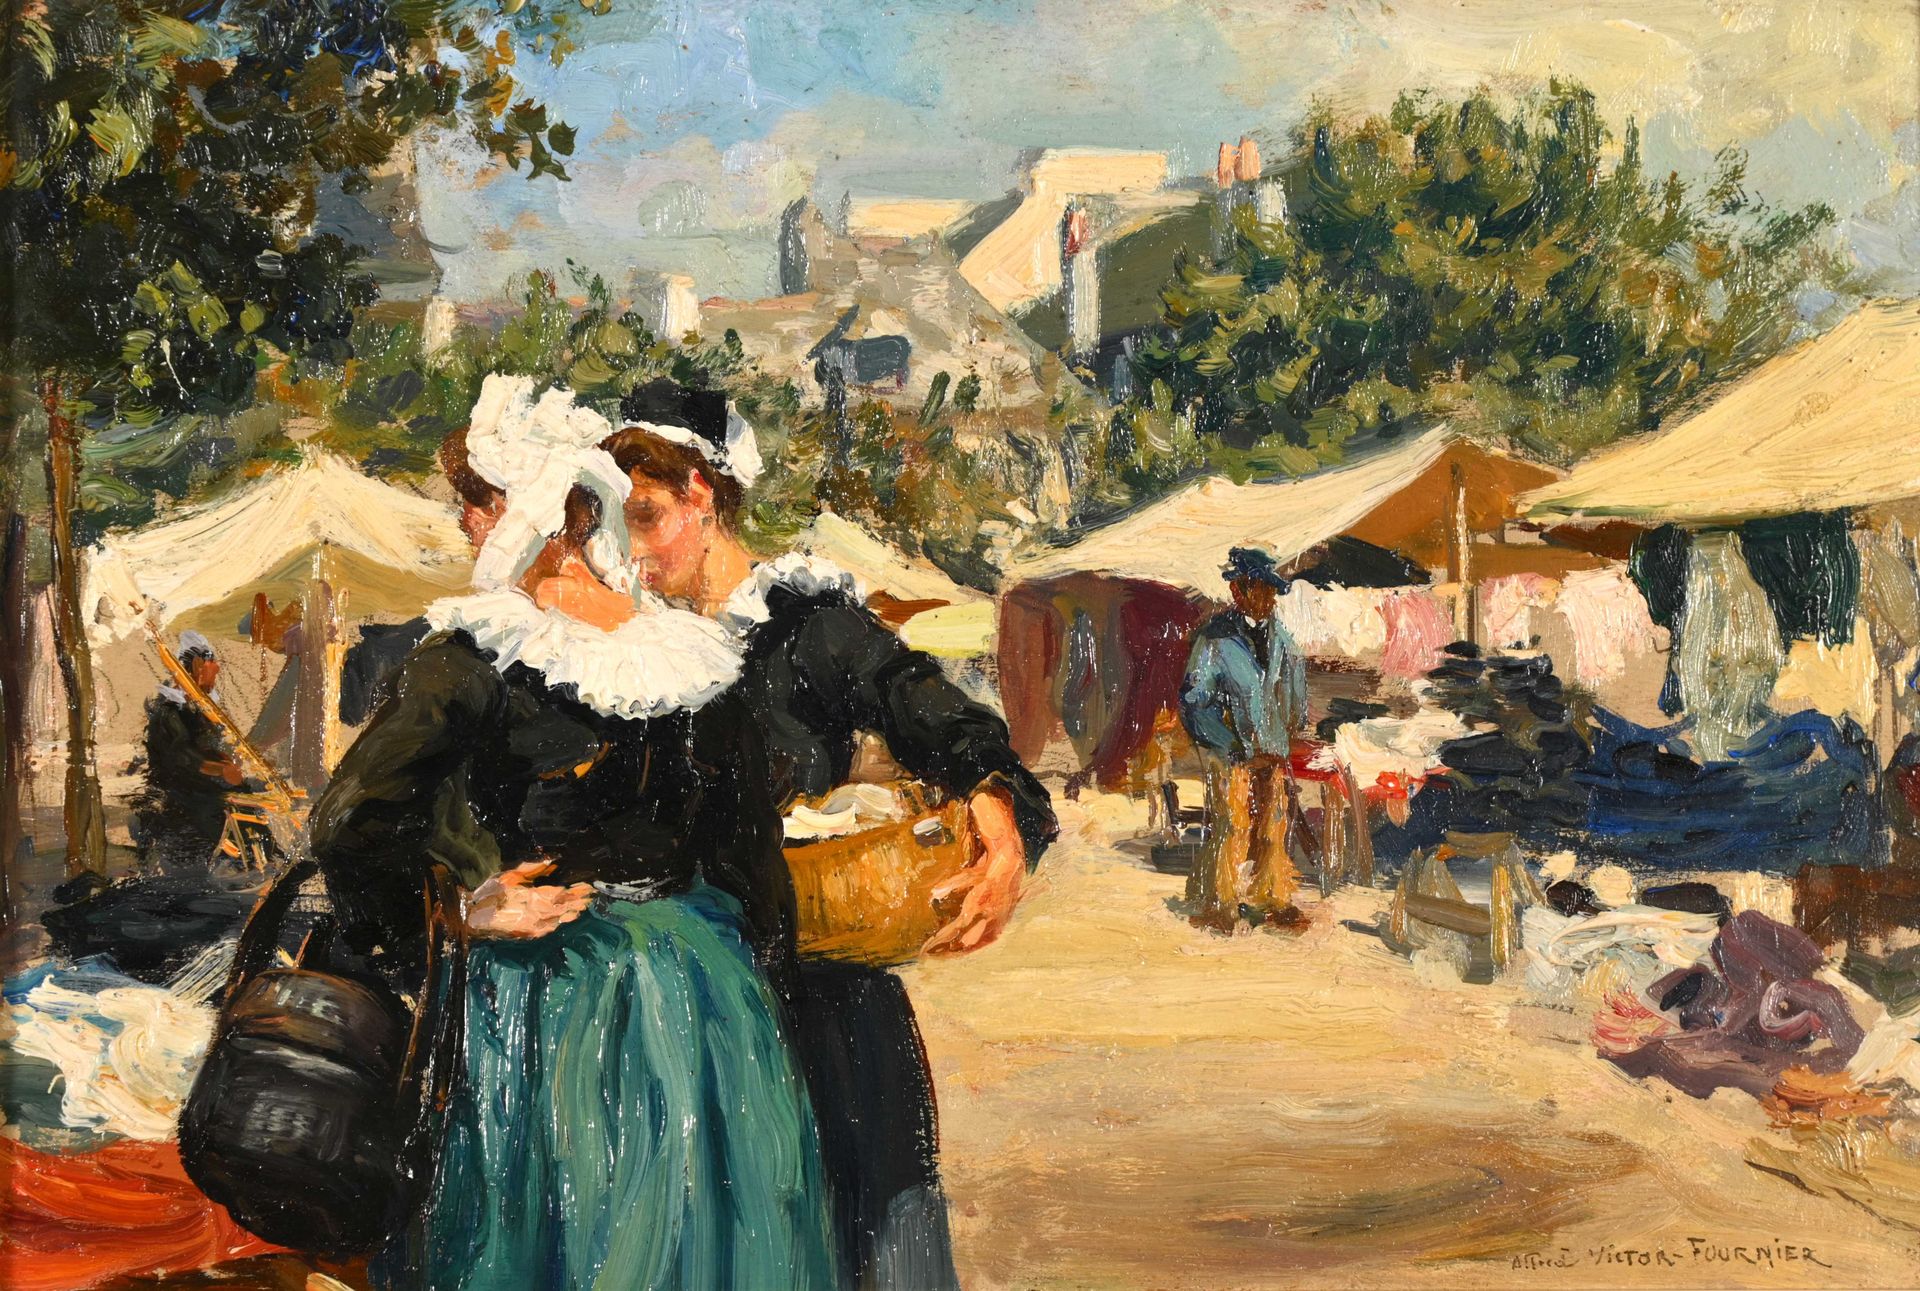 Null Alfred Victor FOURNIER (1872-1924) "Concarneau market day" hsp sbd 19x27